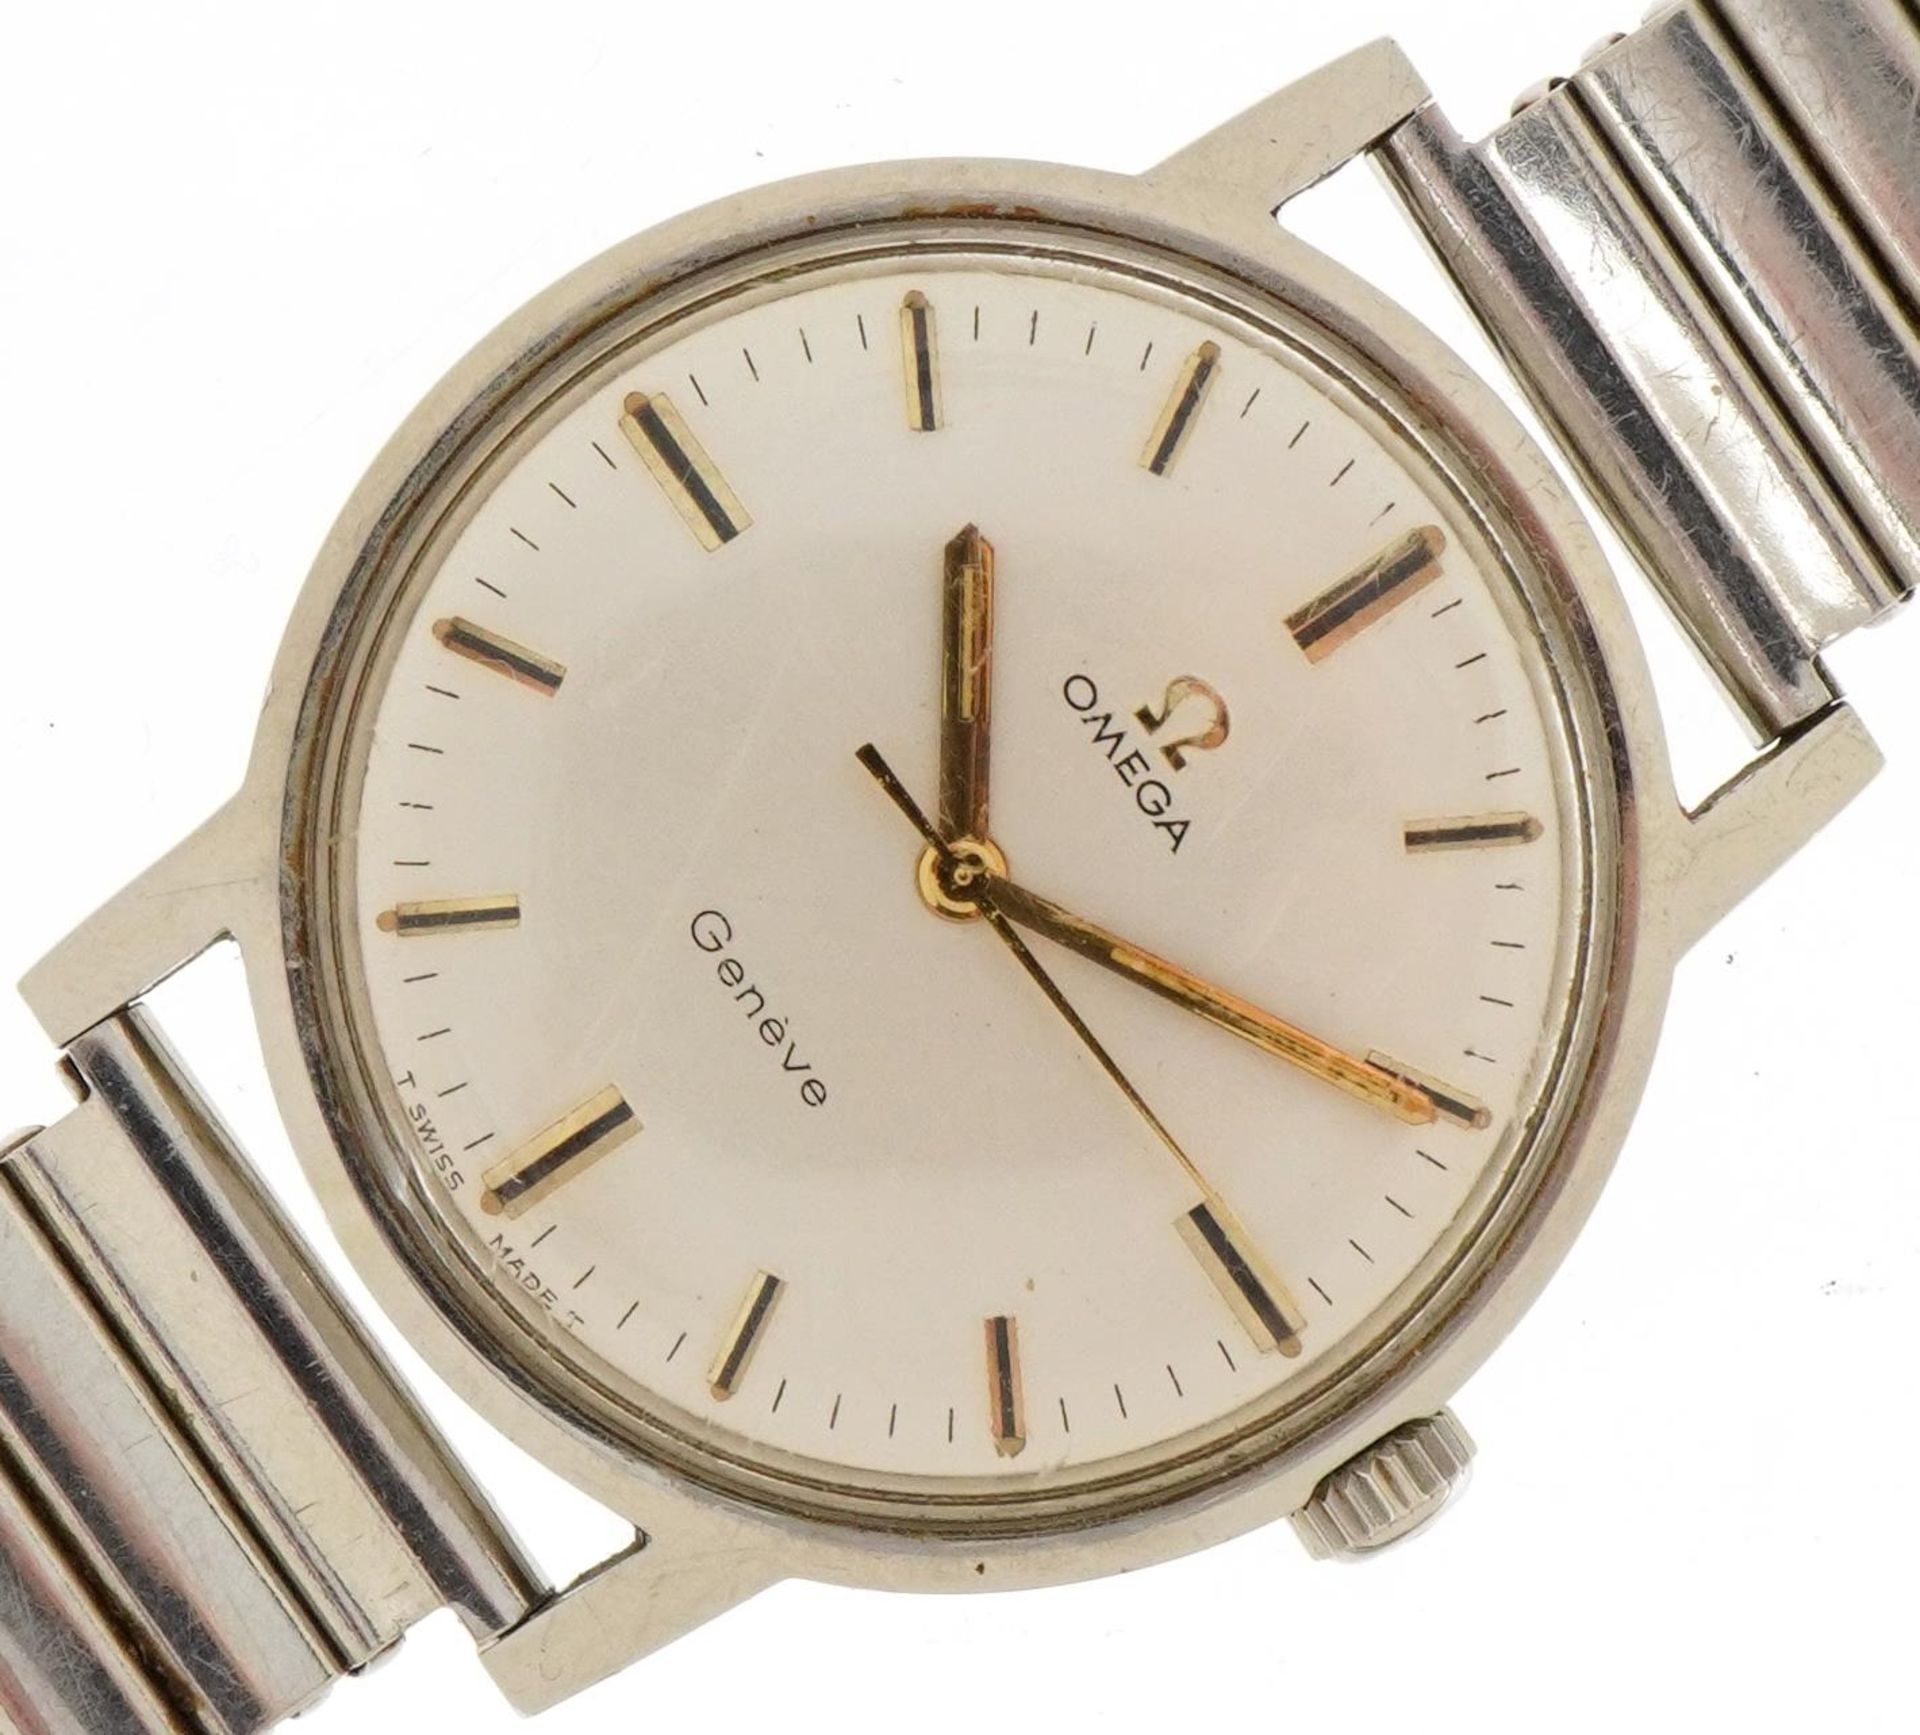 Omega, Gentlemen's Omega Geneve wristwatch with Omega box, the case 34mm in diameter : For further